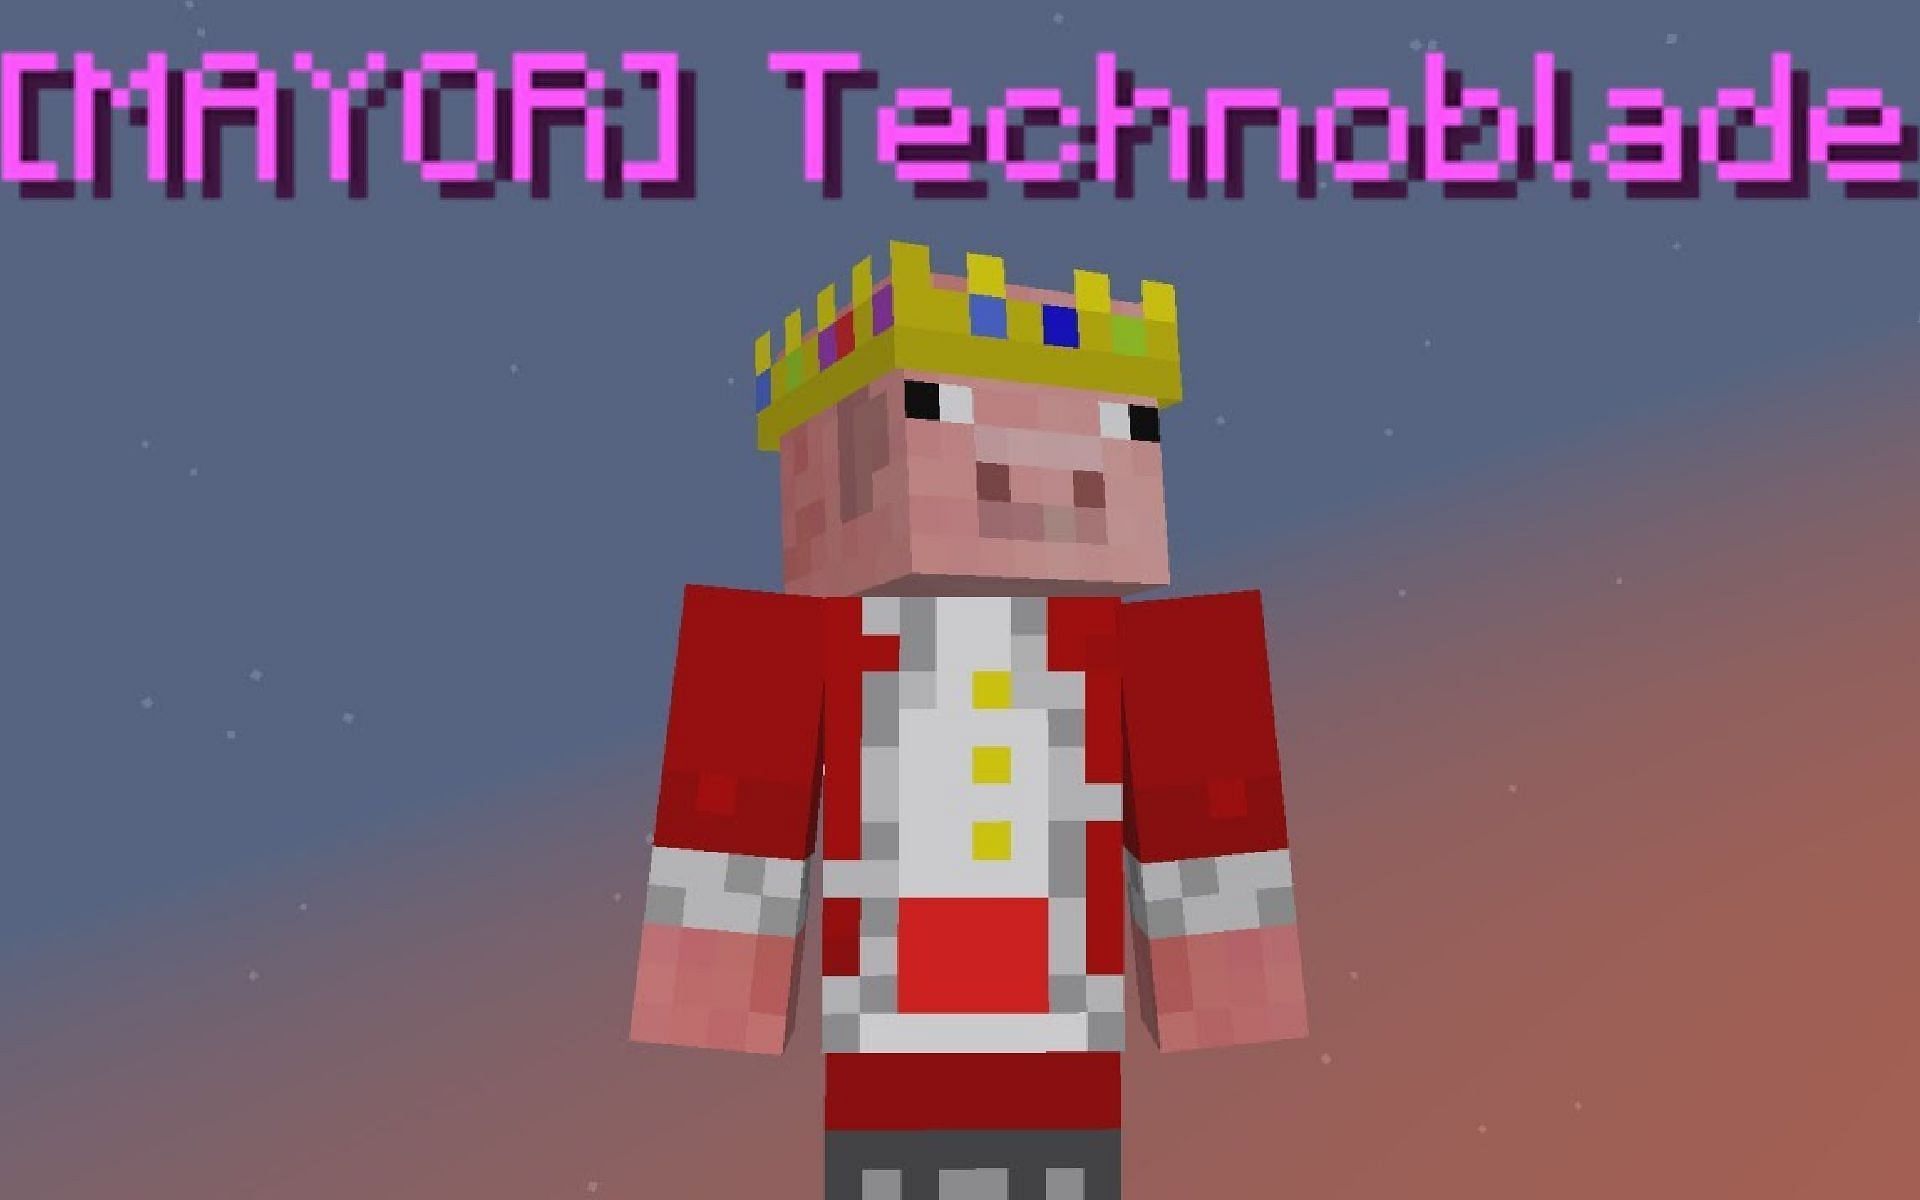 Technoblade, Popular Minecraft r, Dies At Age 23 Of Cancer